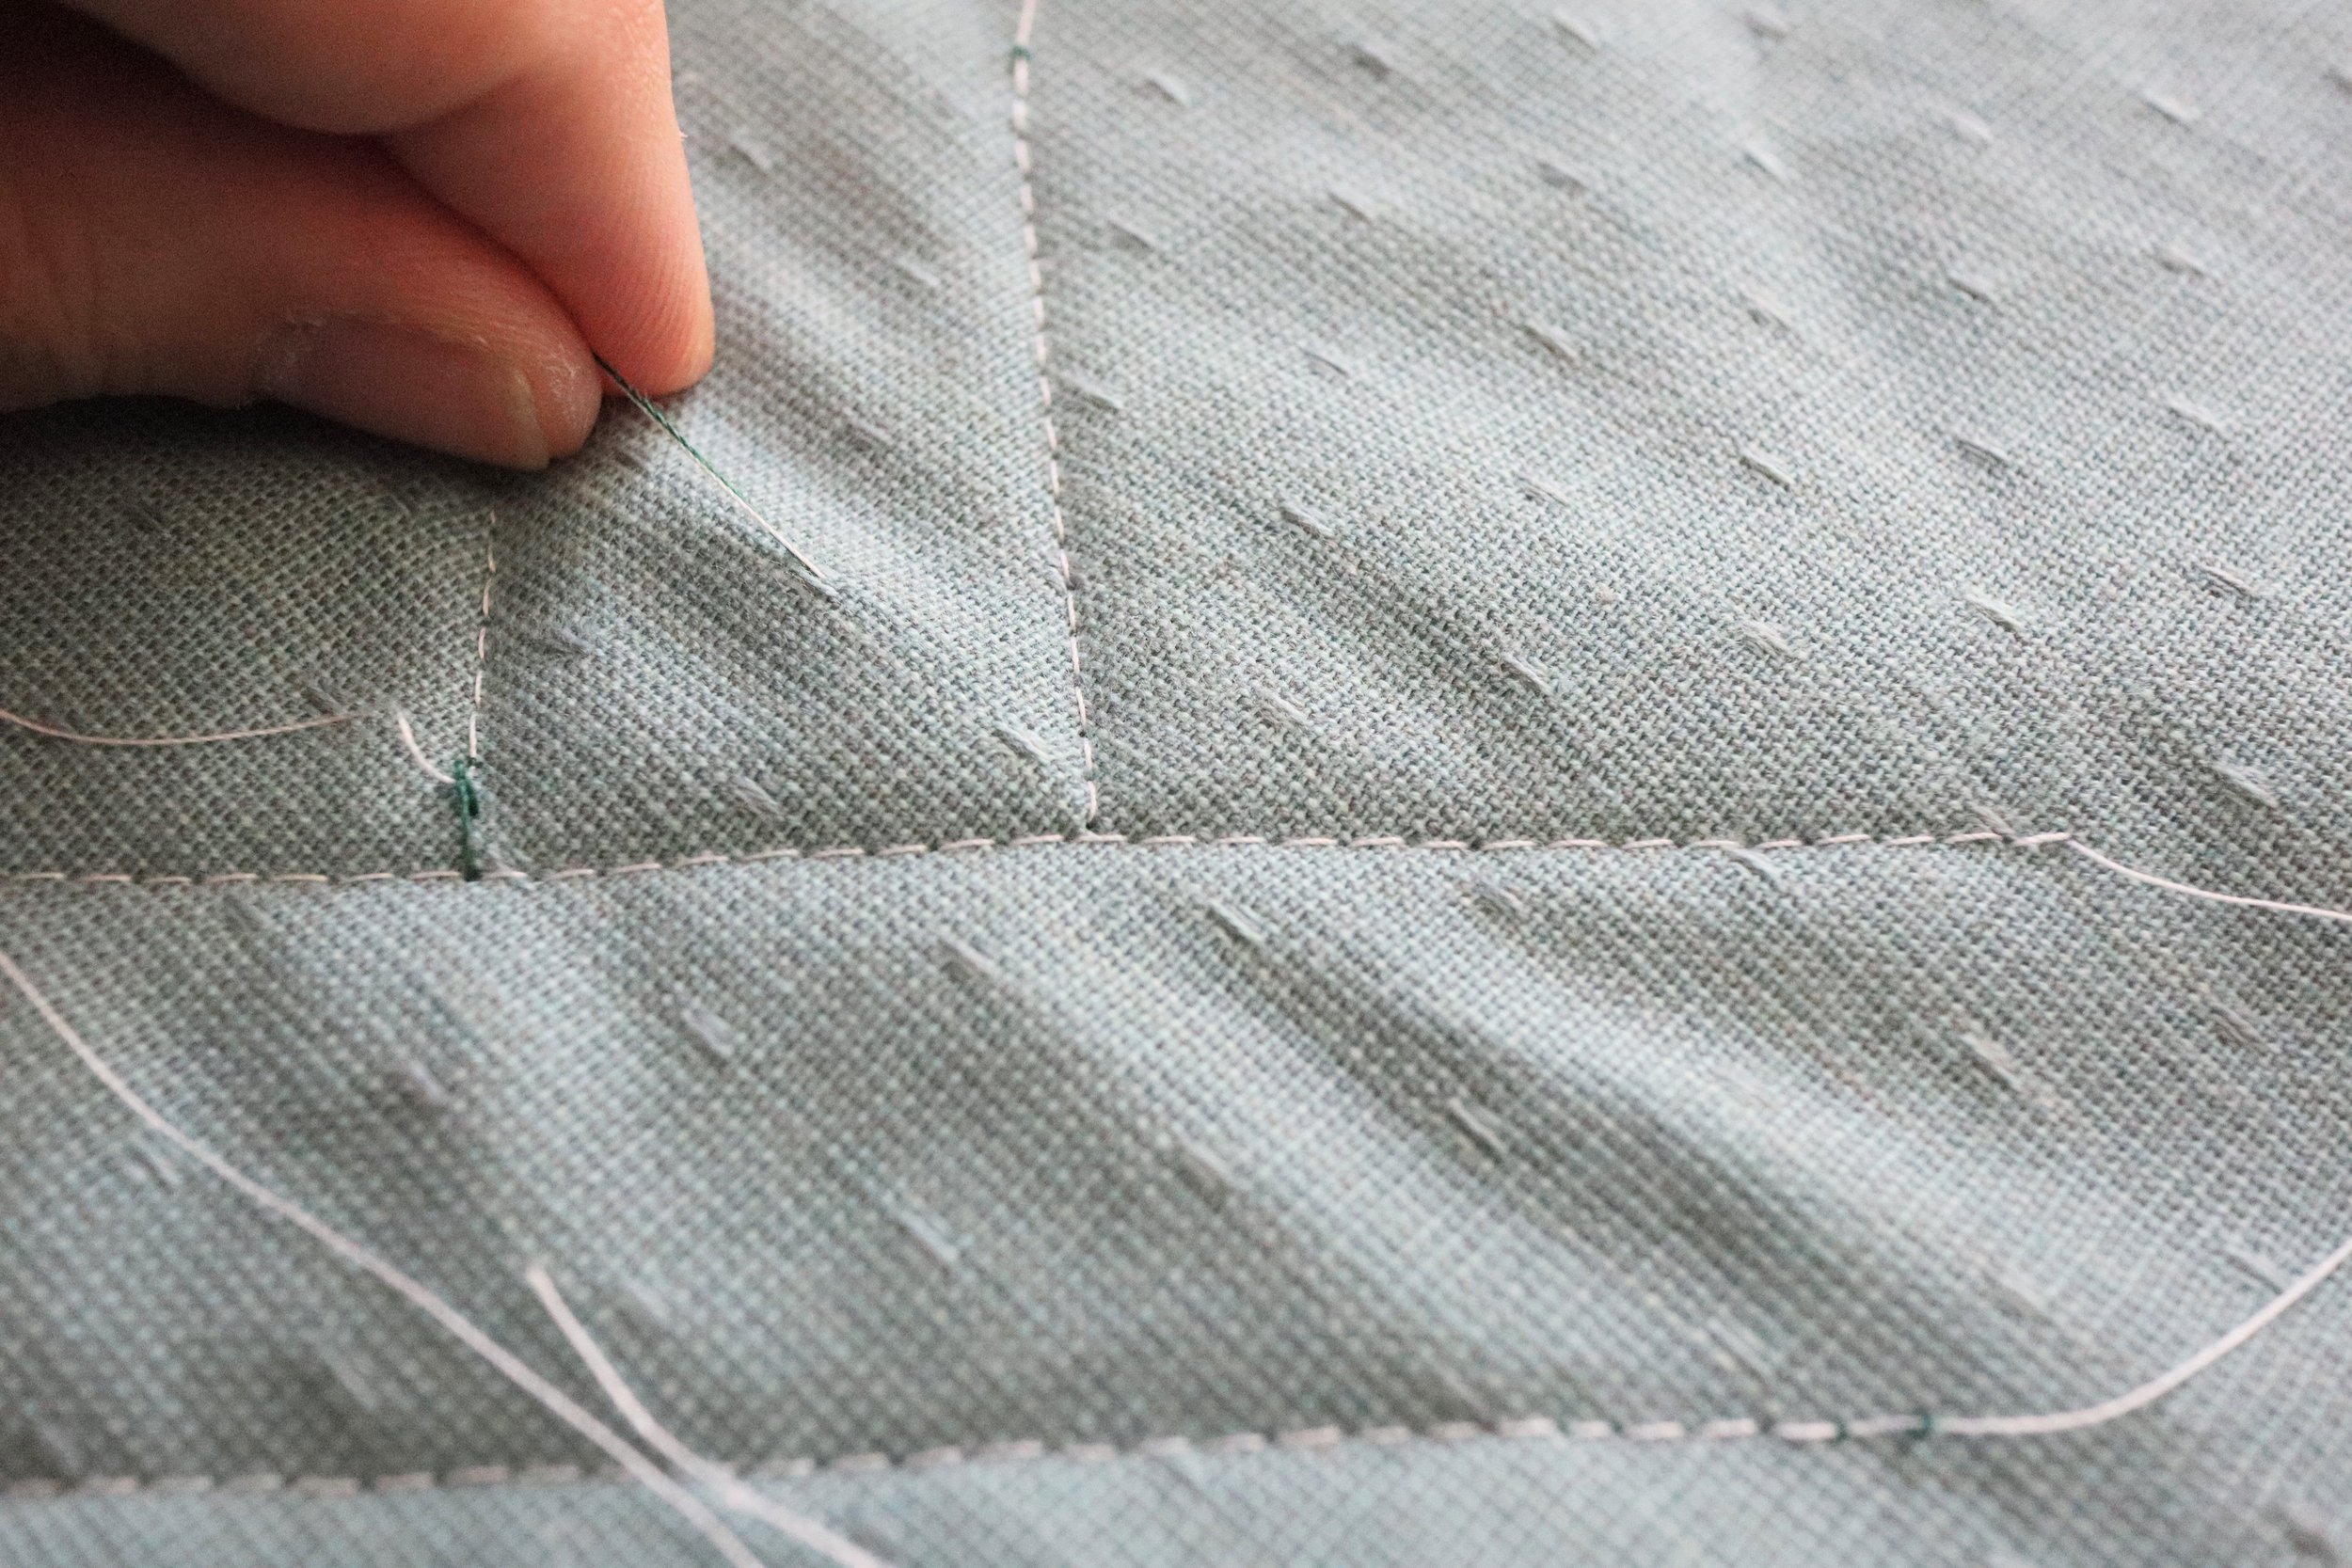 Pull lightly to pop the knot between the layers.